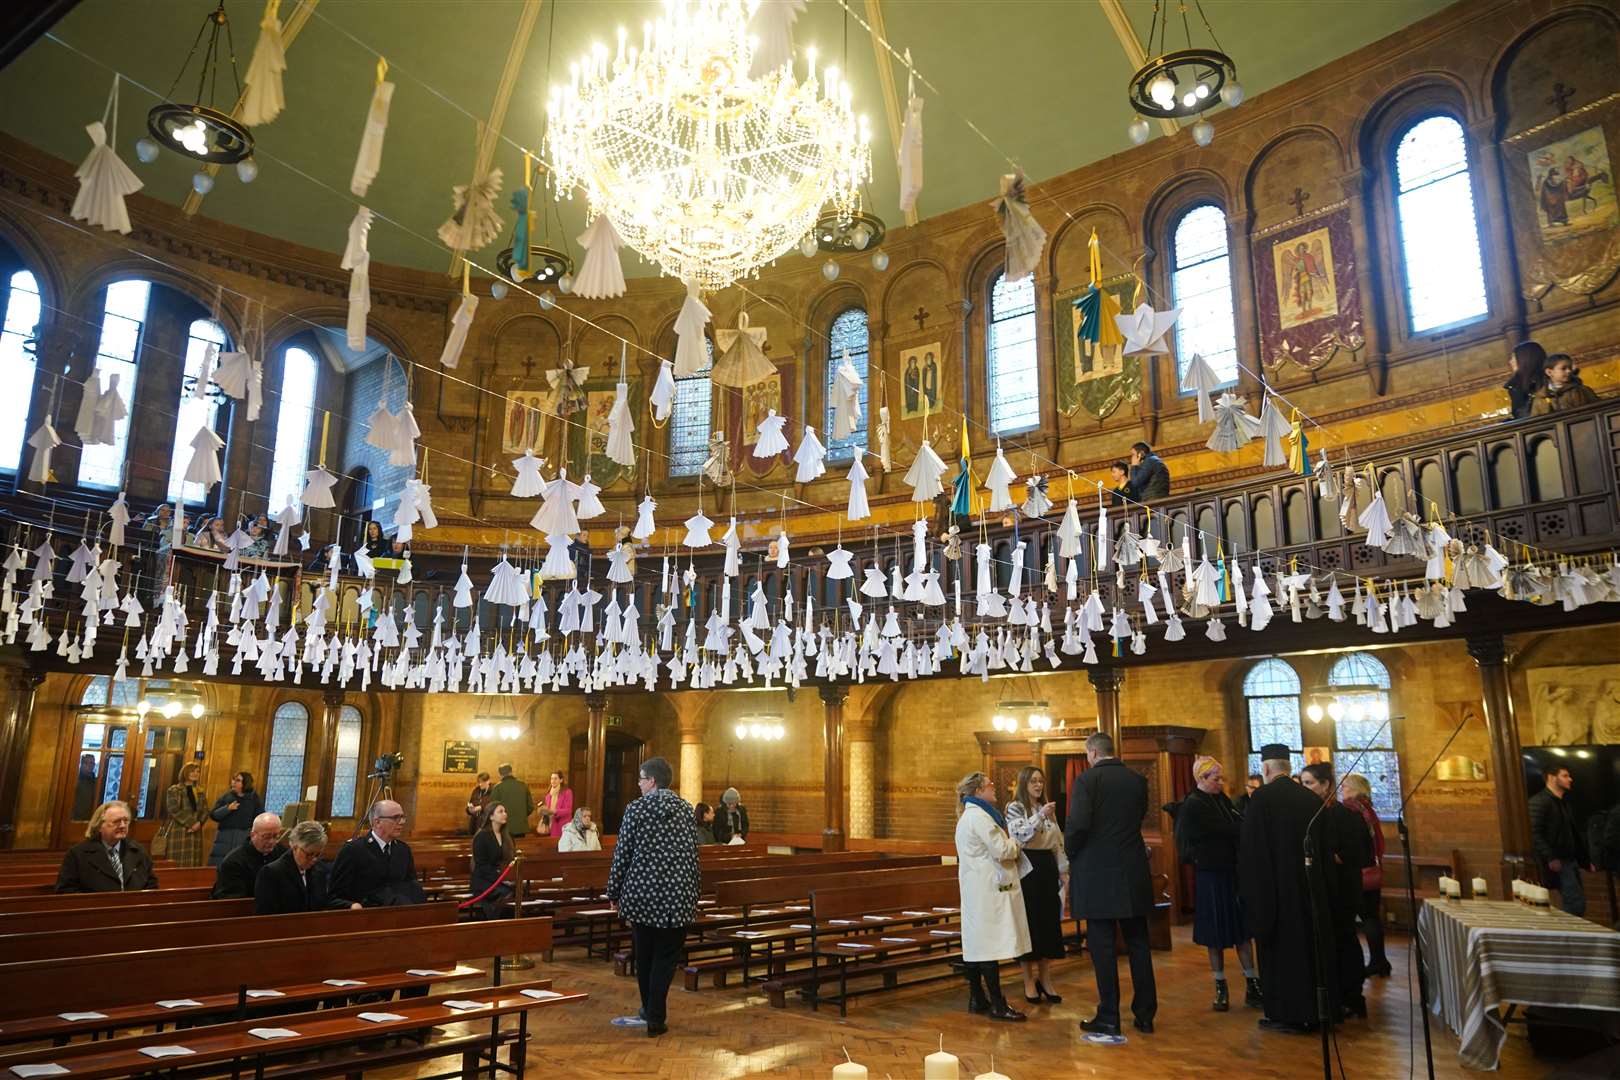 Some 461 paper angels, one for each child that has died in the past year according to the official statistics, hang from the roof ahead of an ecumenical prayer service at the Ukrainian Catholic Cathedral in London to mark the one year anniversary of the Russian invasion of Ukraine (Yui Mok/PA)